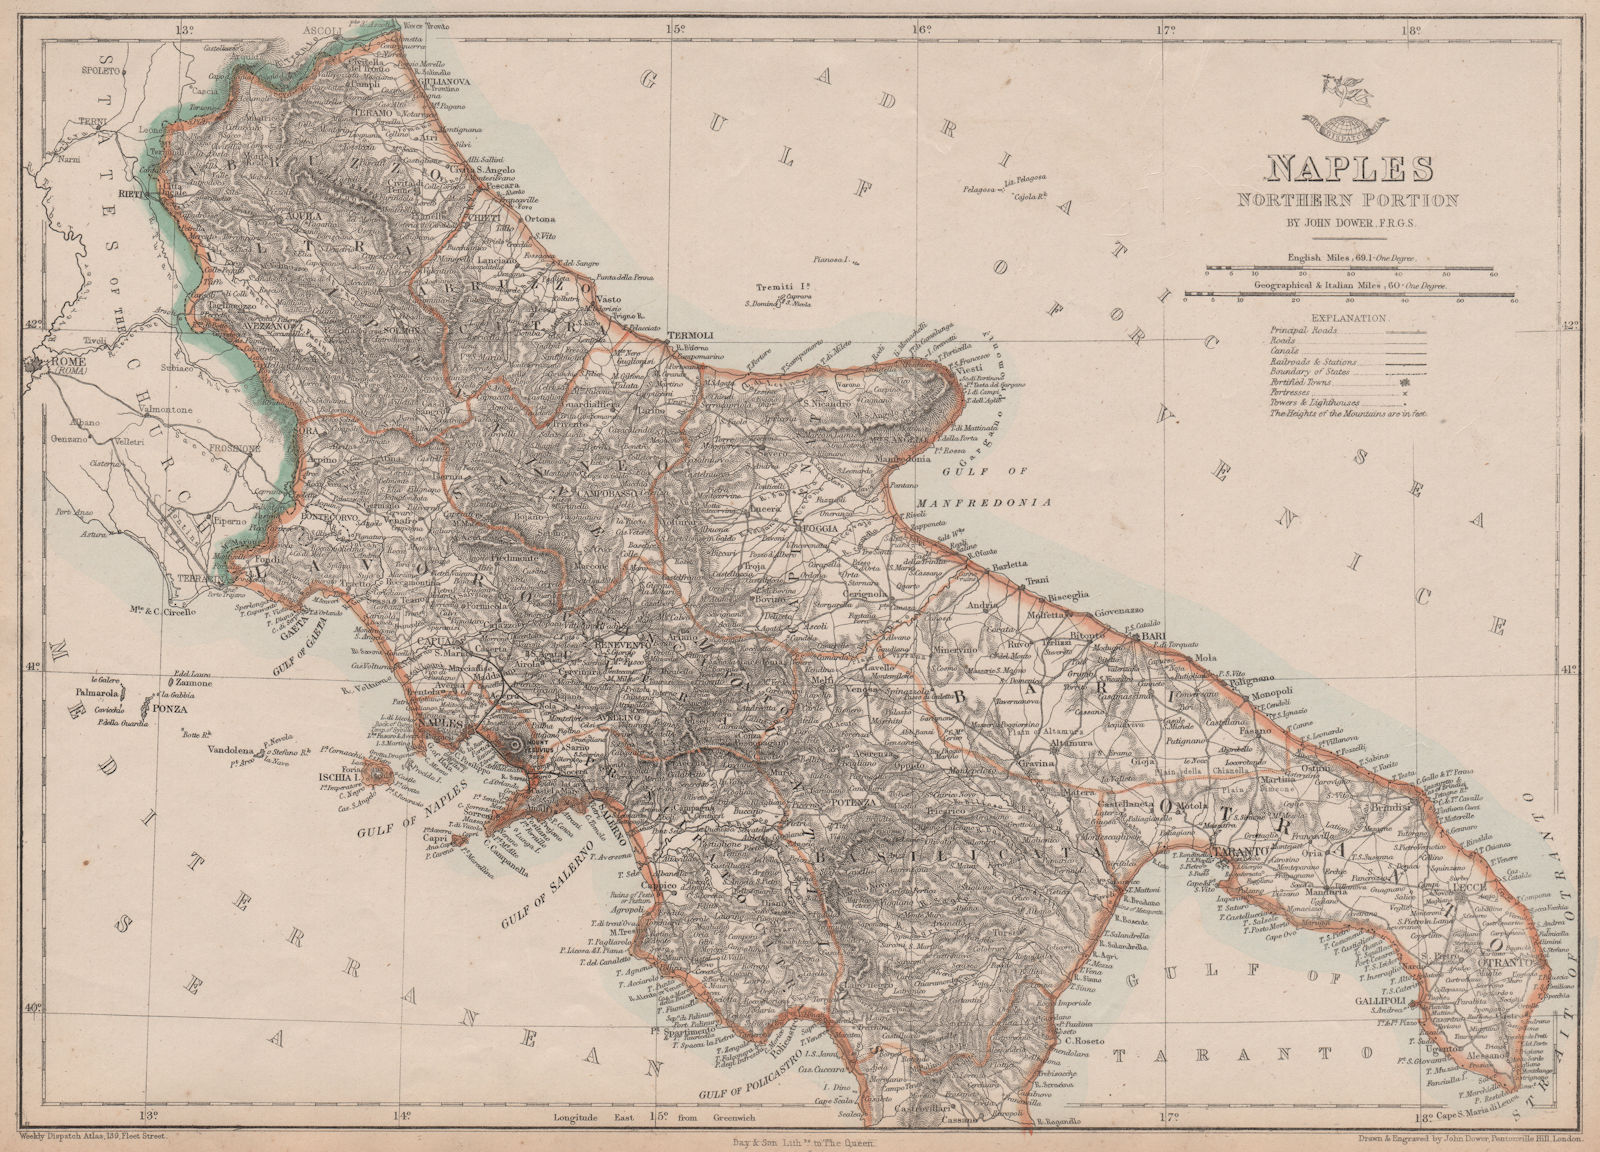 KINGDOM OF NAPLES/TWO SICILIES North. Southern Italy. DOWER. Dispatch 1863 map